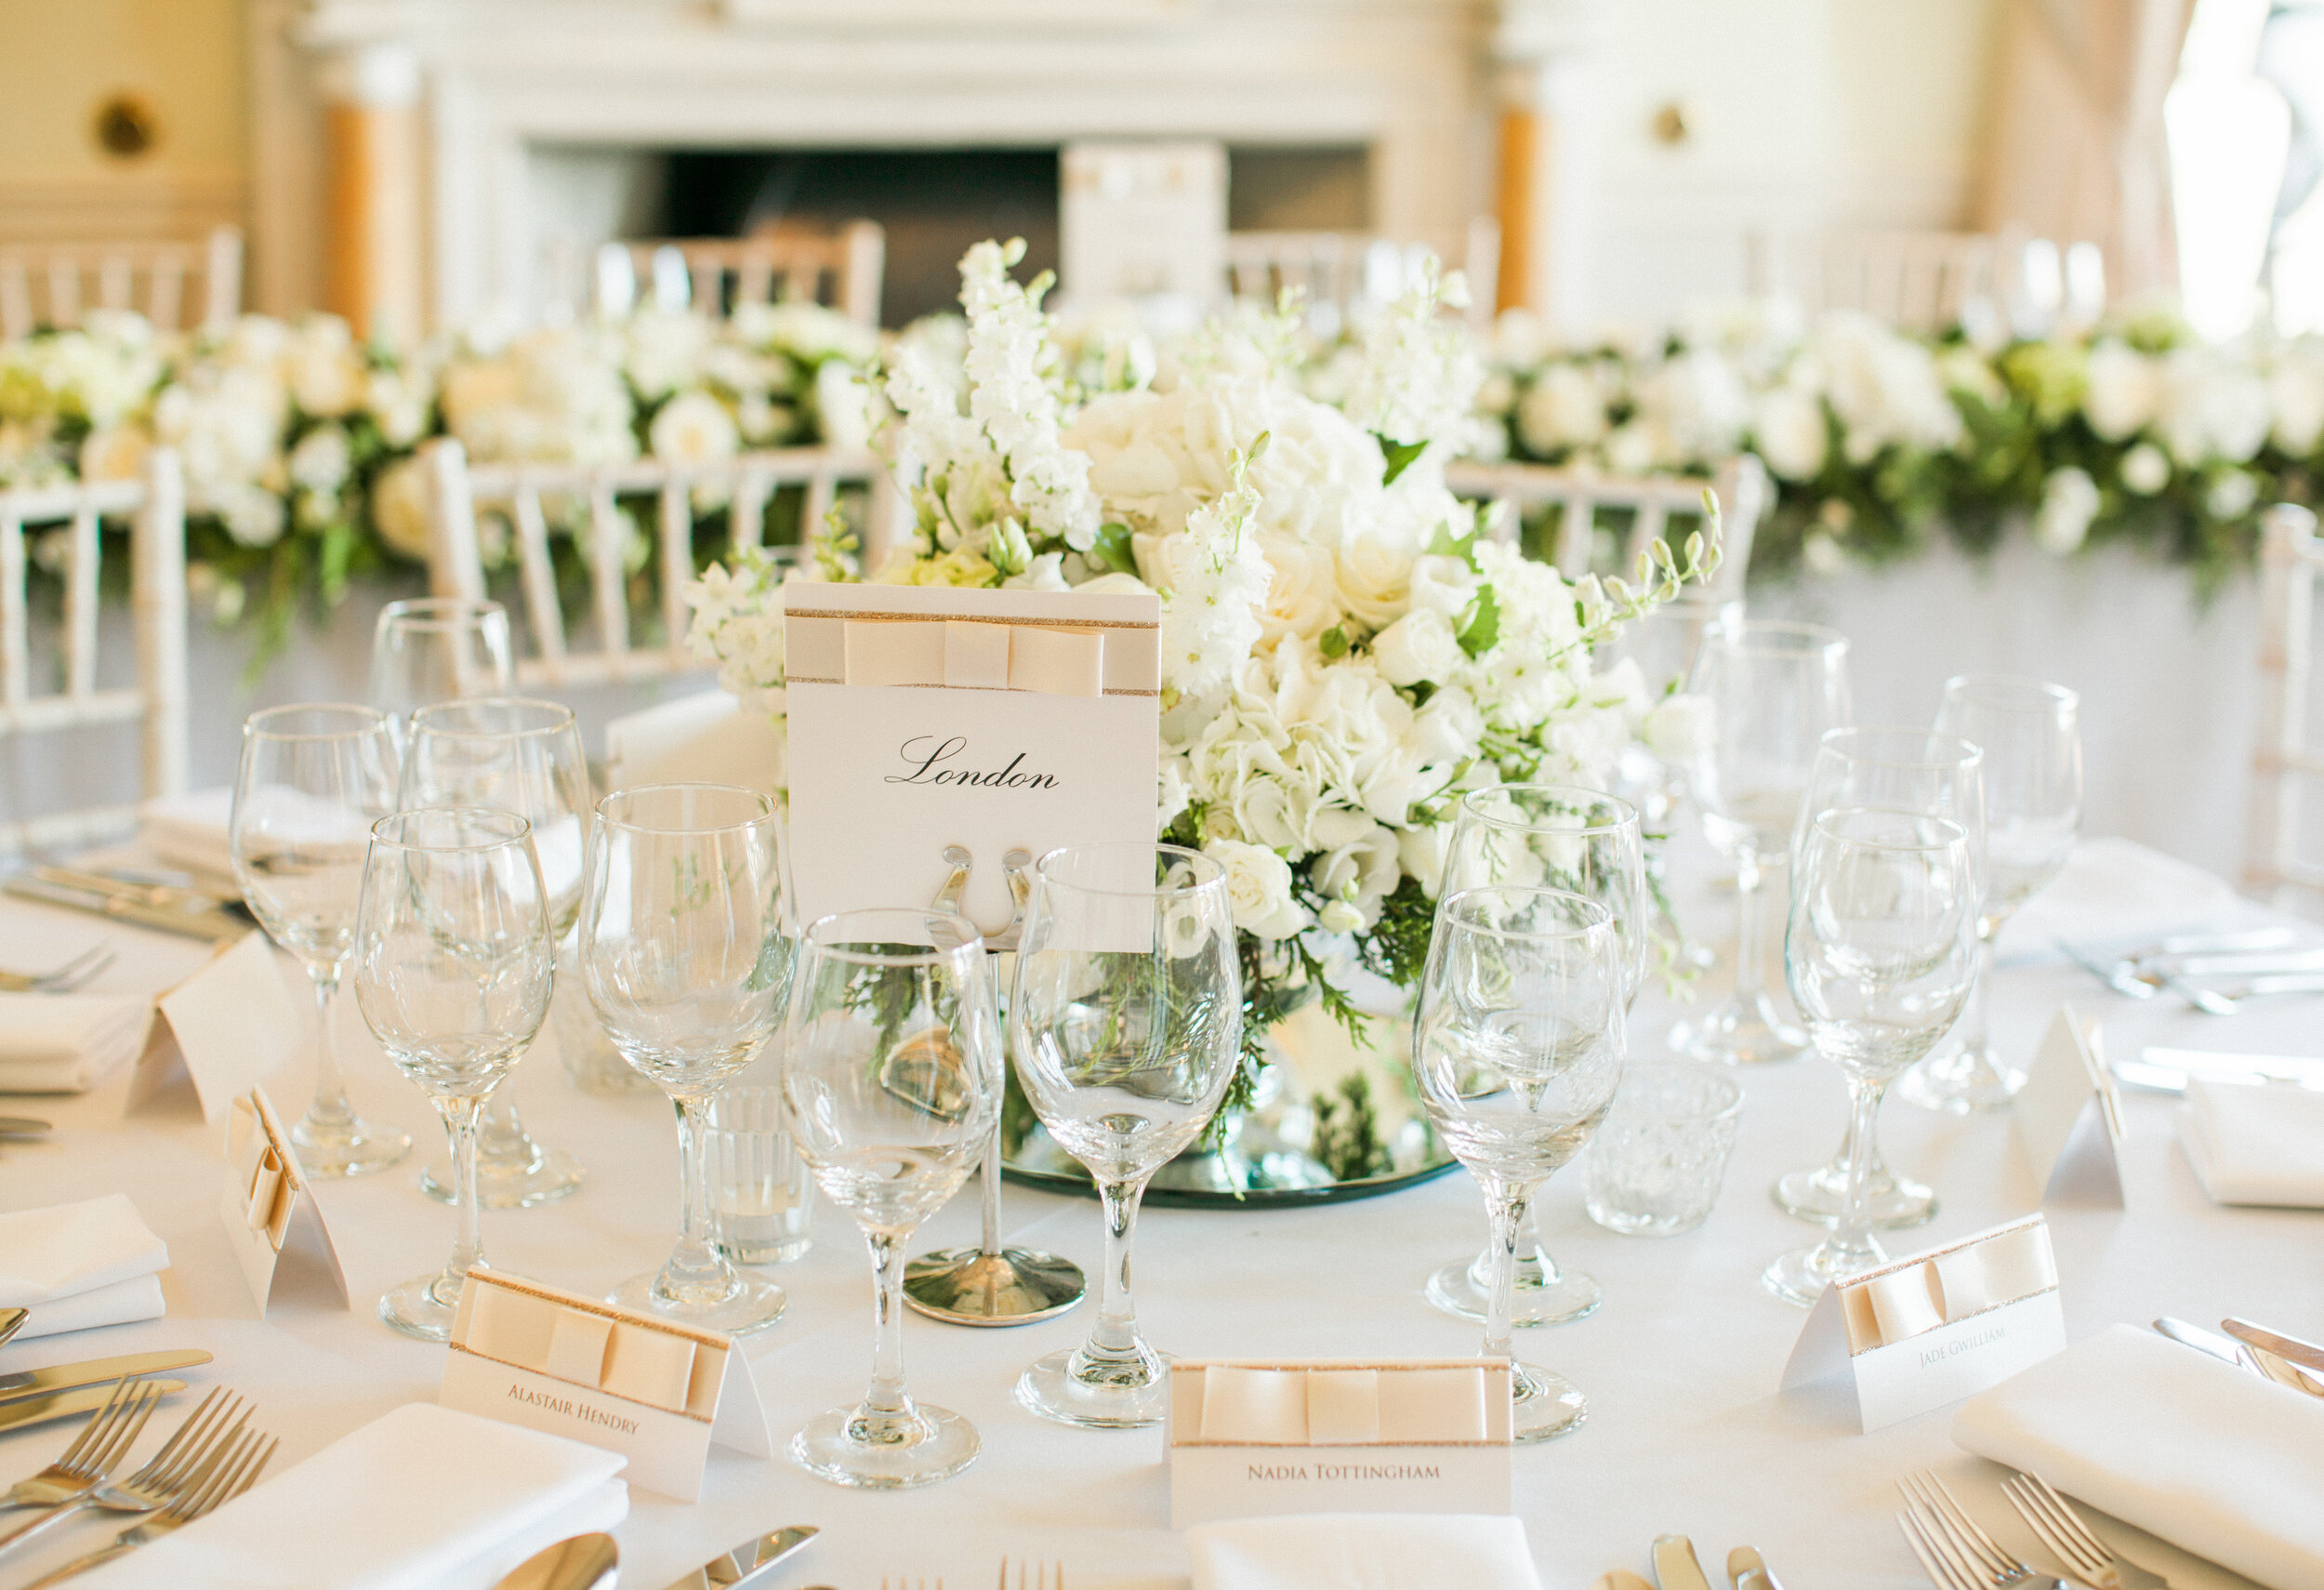 Prestwold Hall floral table arrangement, decor and styling.jpg